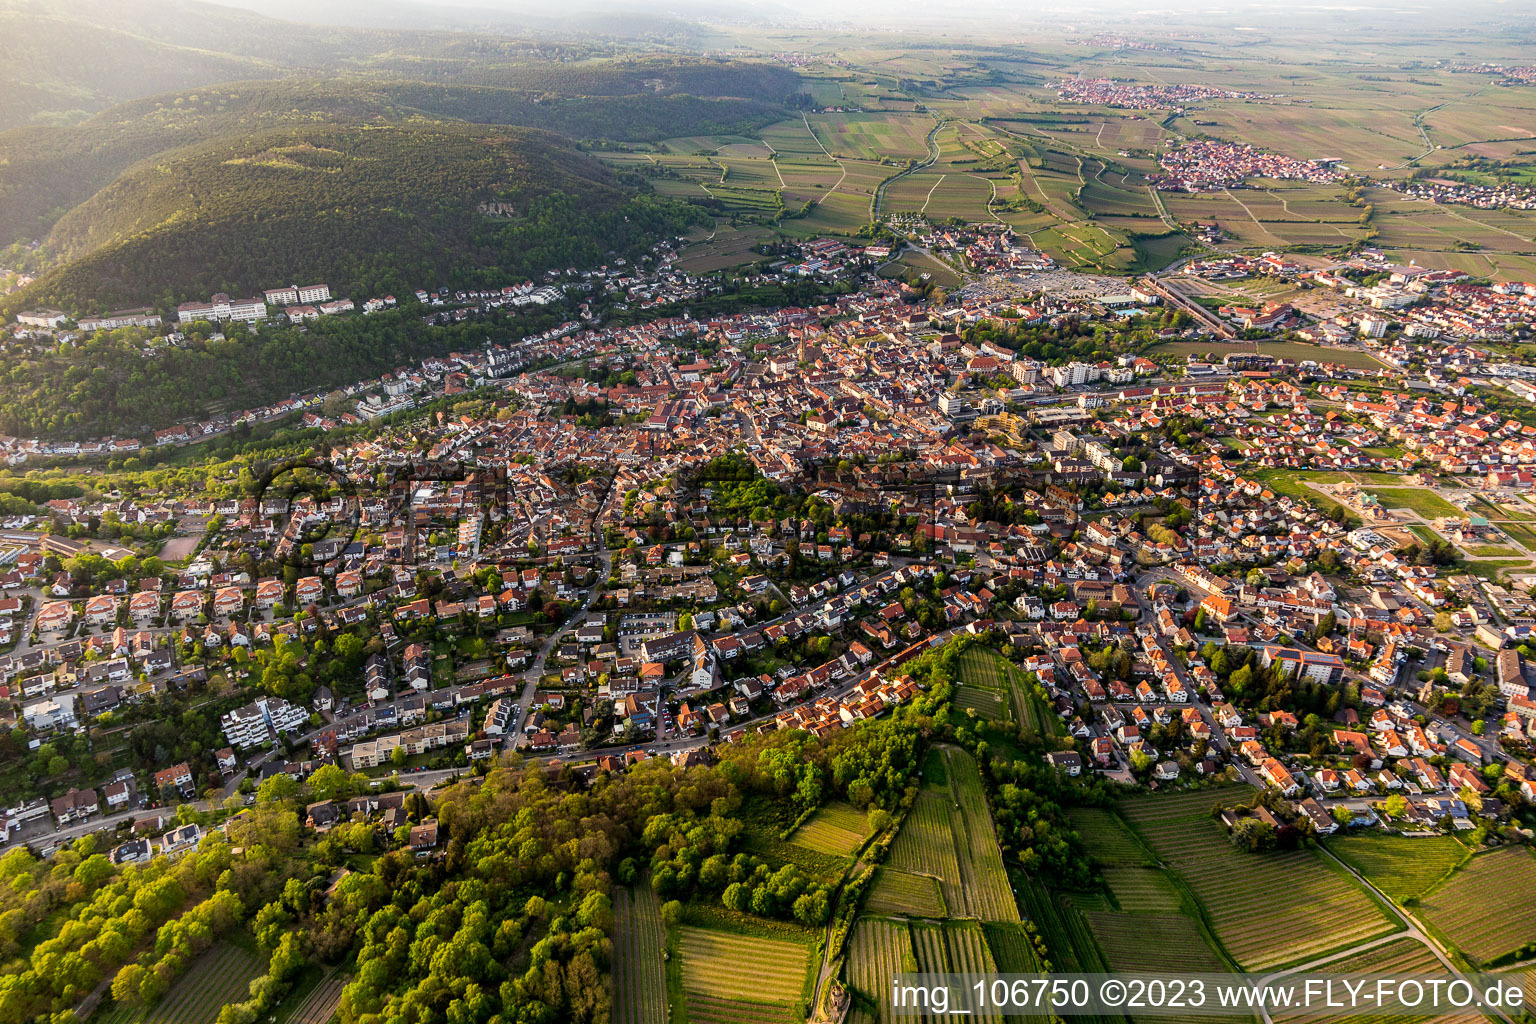 From the south in the district Seebach in Bad Dürkheim in the state Rhineland-Palatinate, Germany